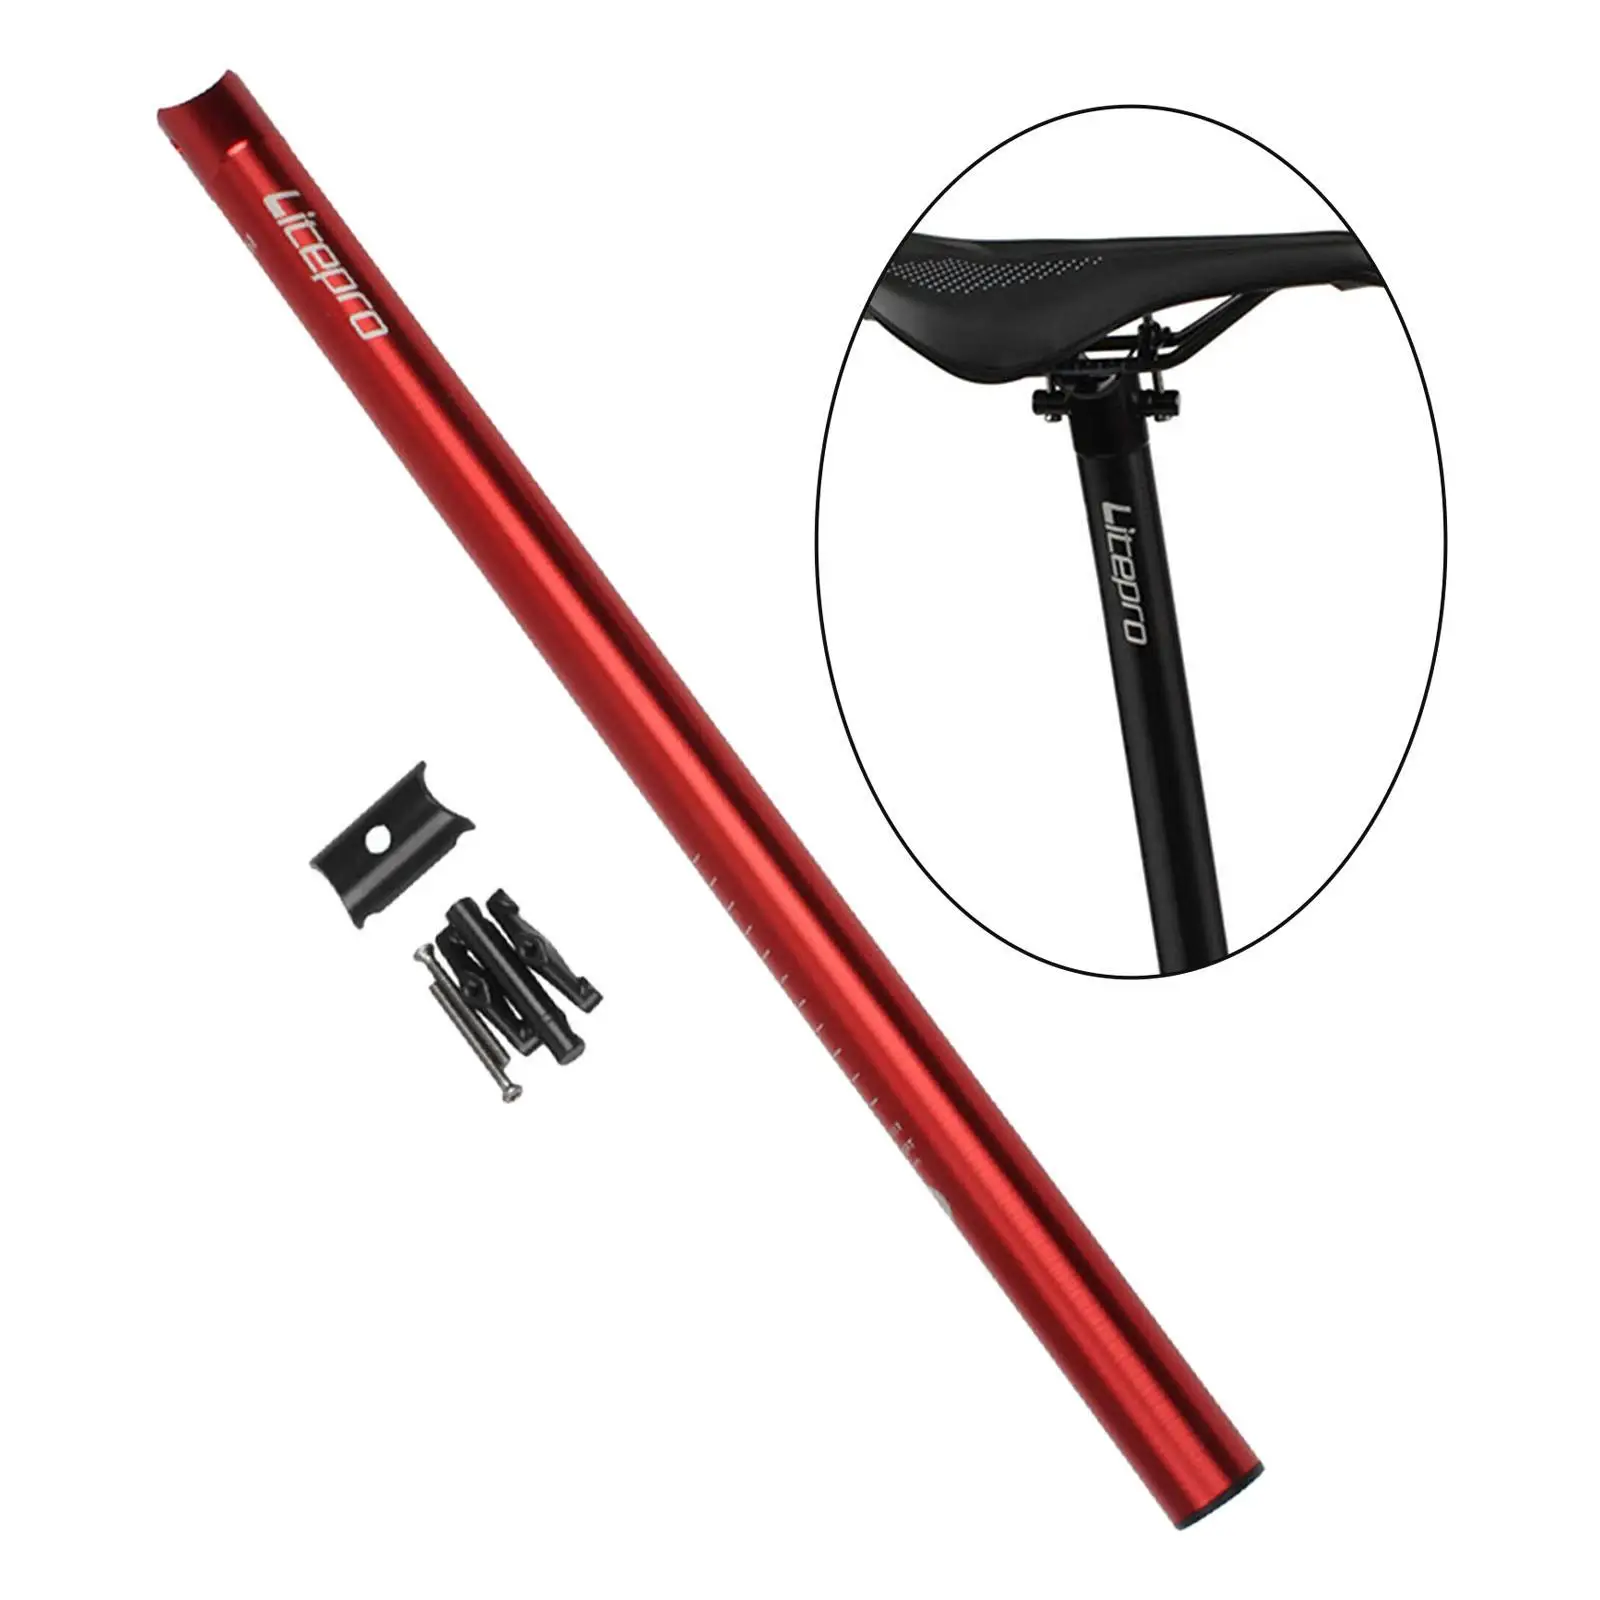 Folding Bike Seatpost Seat Rod Aluminum Alloy 31.8 Seat Post Seat Tube Seatpipe Replacement for